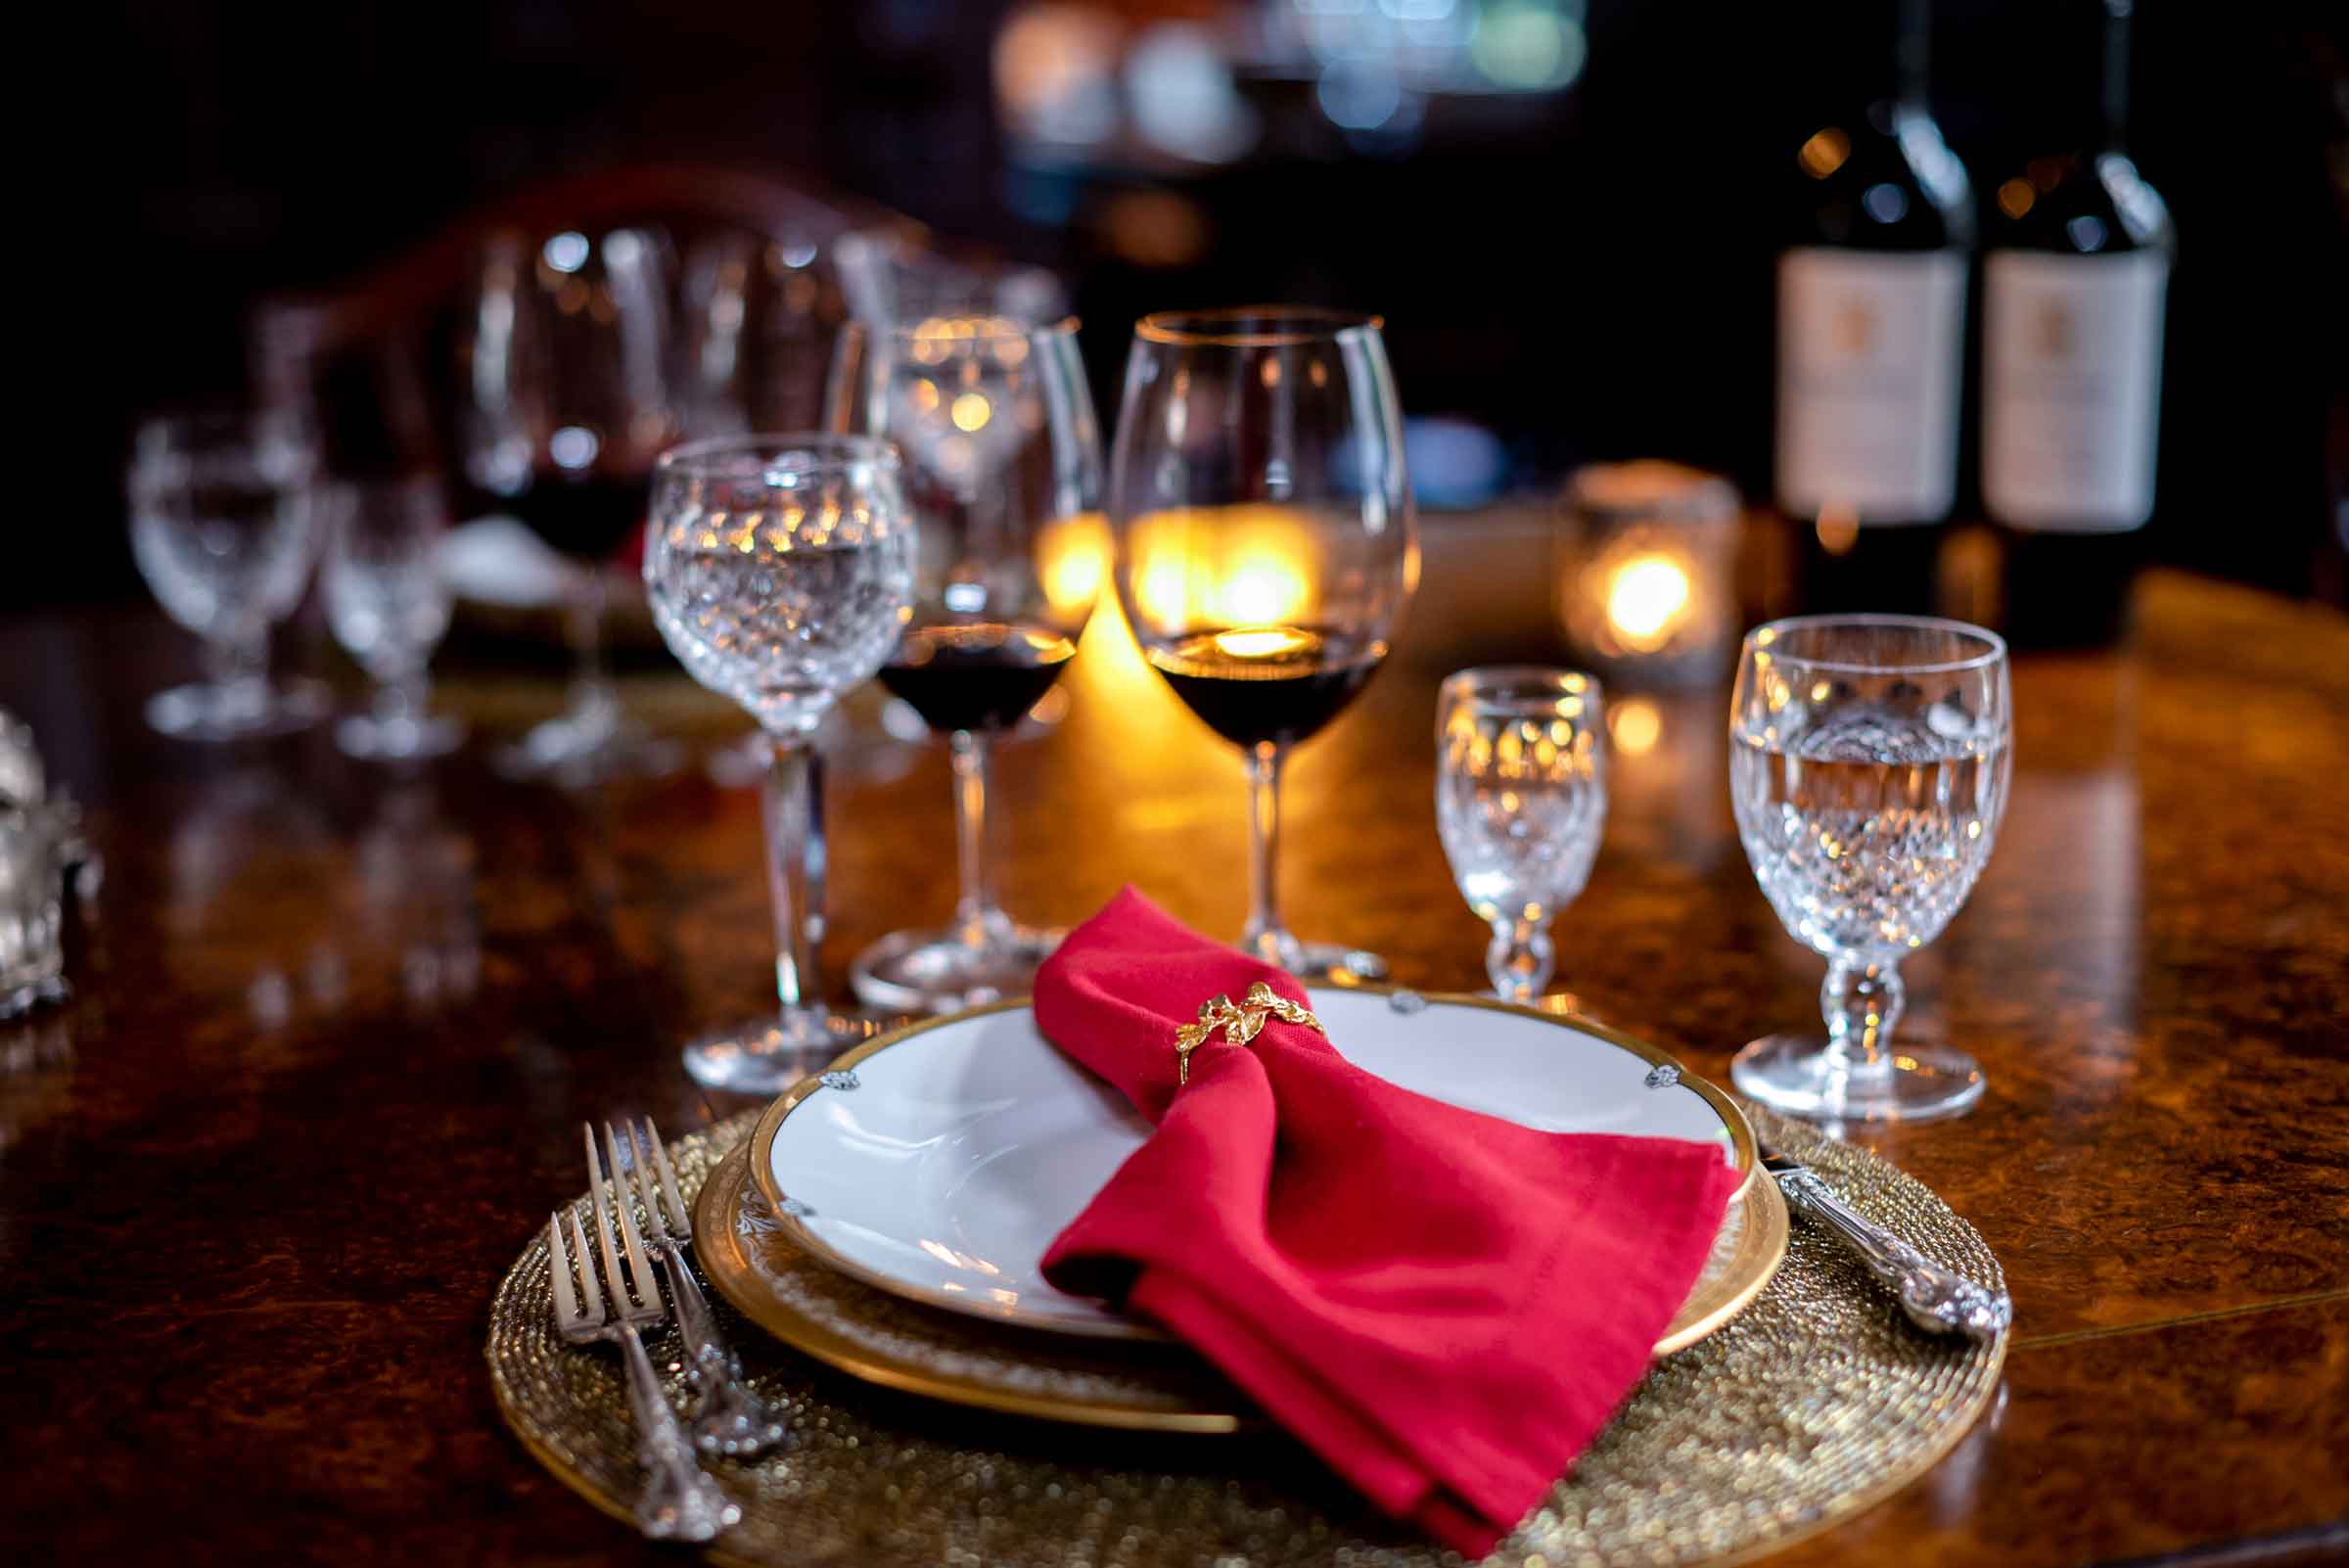 wine glasses and place setting on table with red napkin on the plate